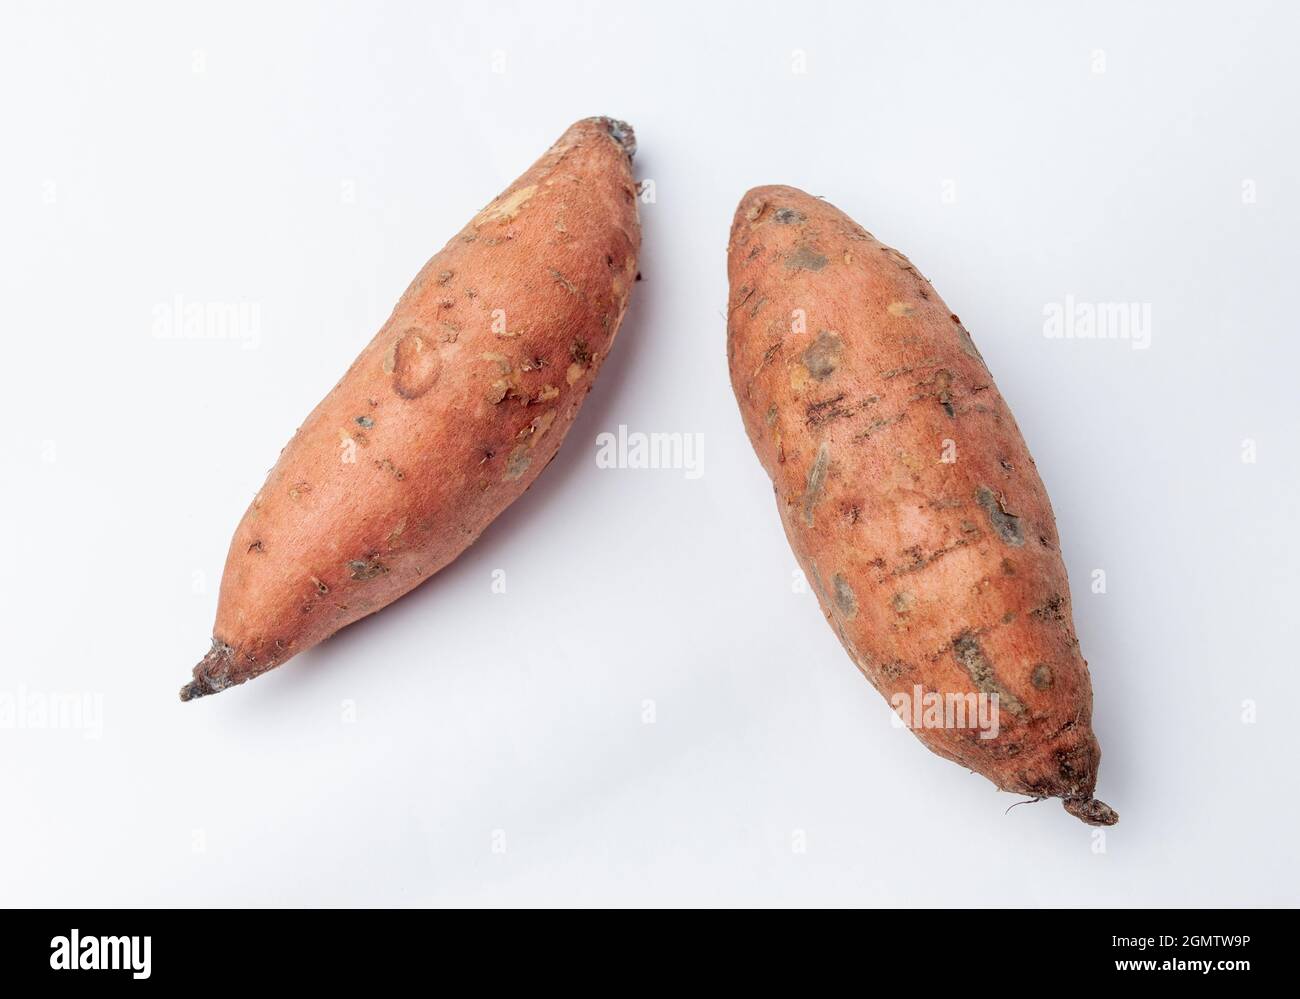 Two sweet potatoes on a white background Stock Photo